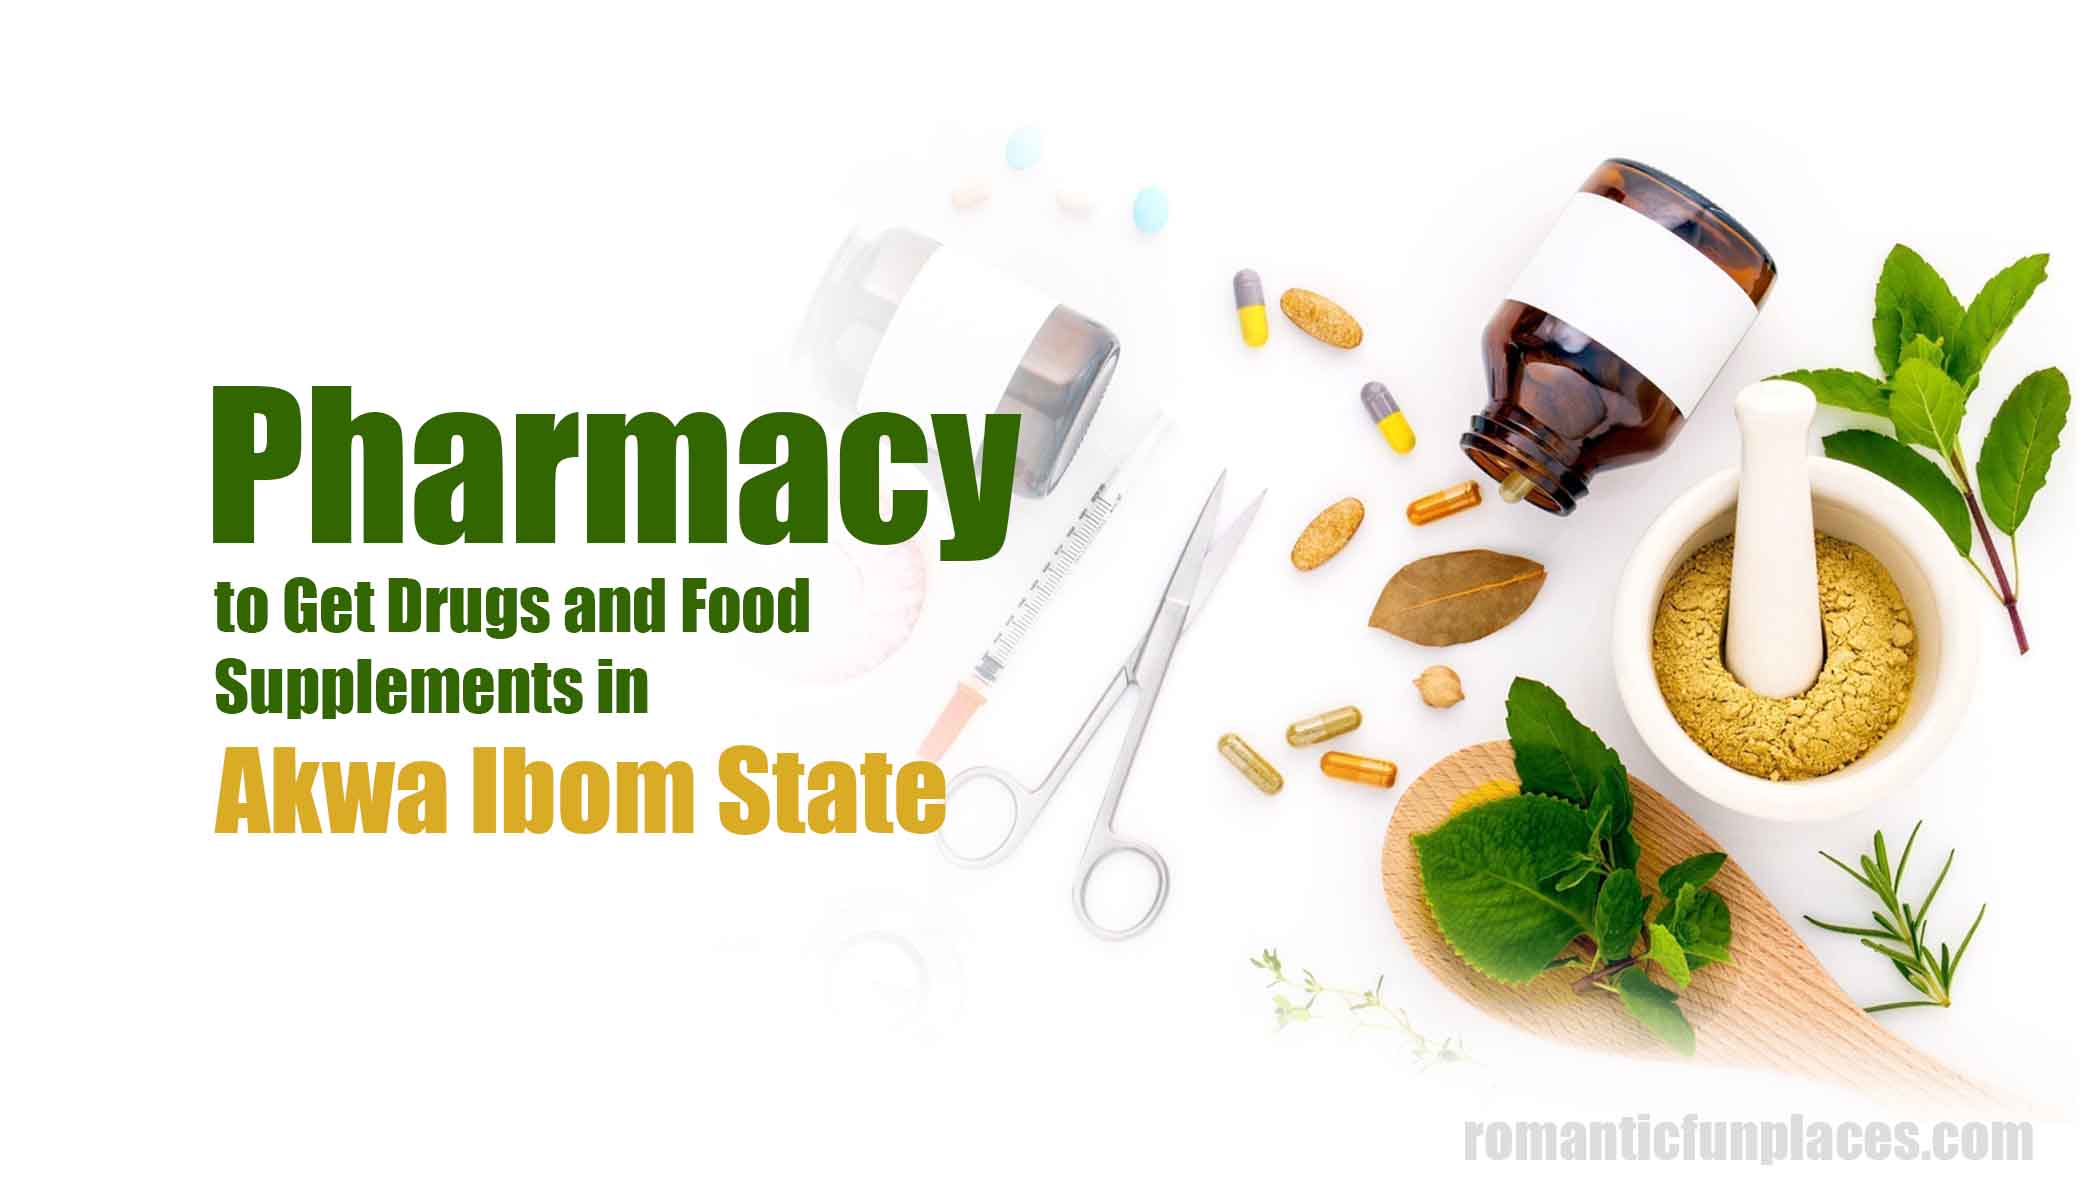 Pharmacy to Get Drugs and Food Supplements in Akwa Ibom State